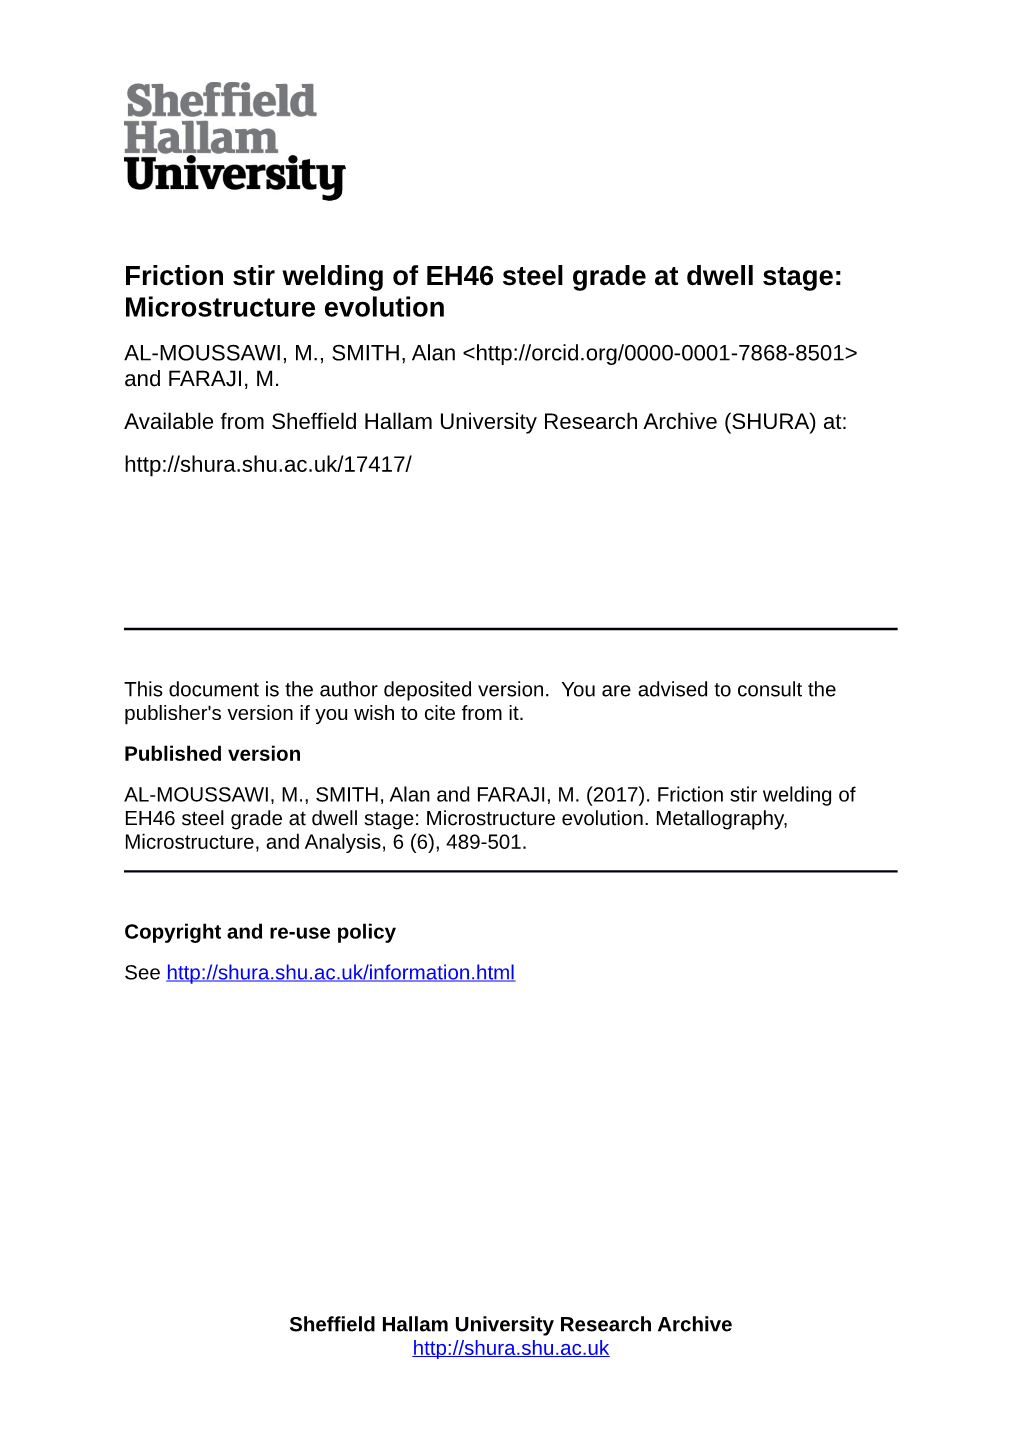 Friction Stir Welding of EH46 Steel Grade at Dwell Stage: Microstructure